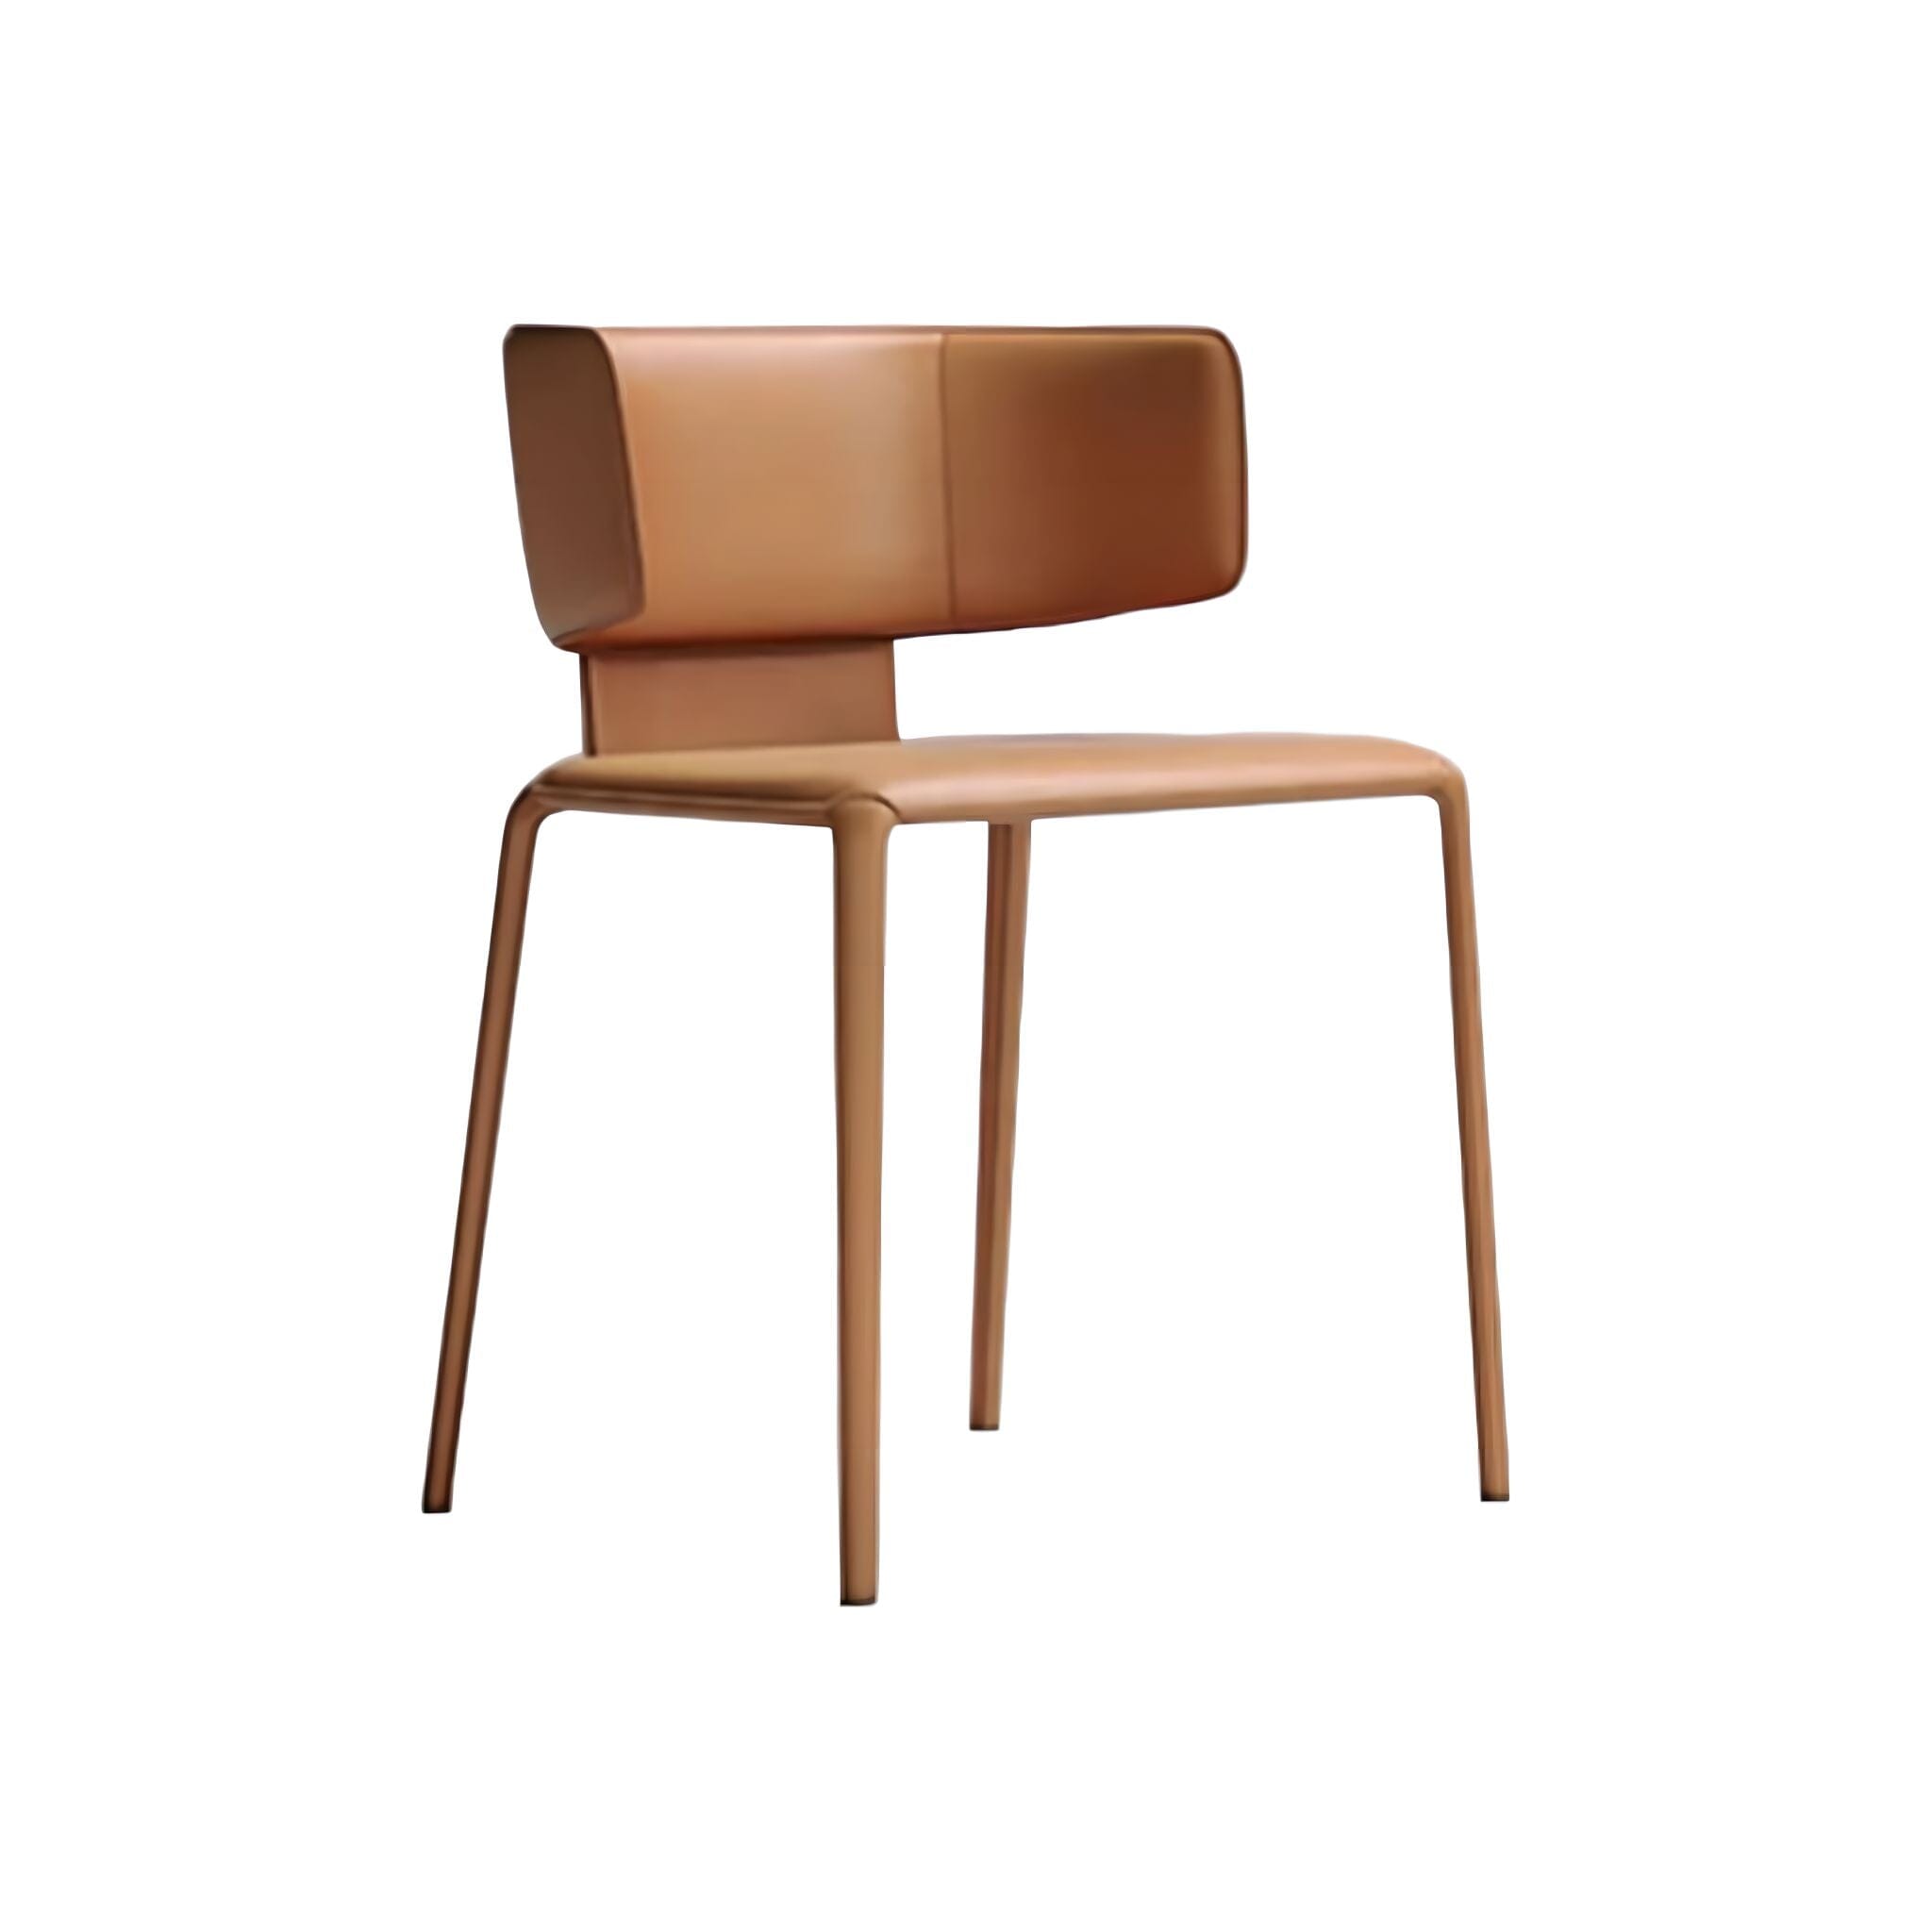 Sylvie Dining Chairs Chair Tan 